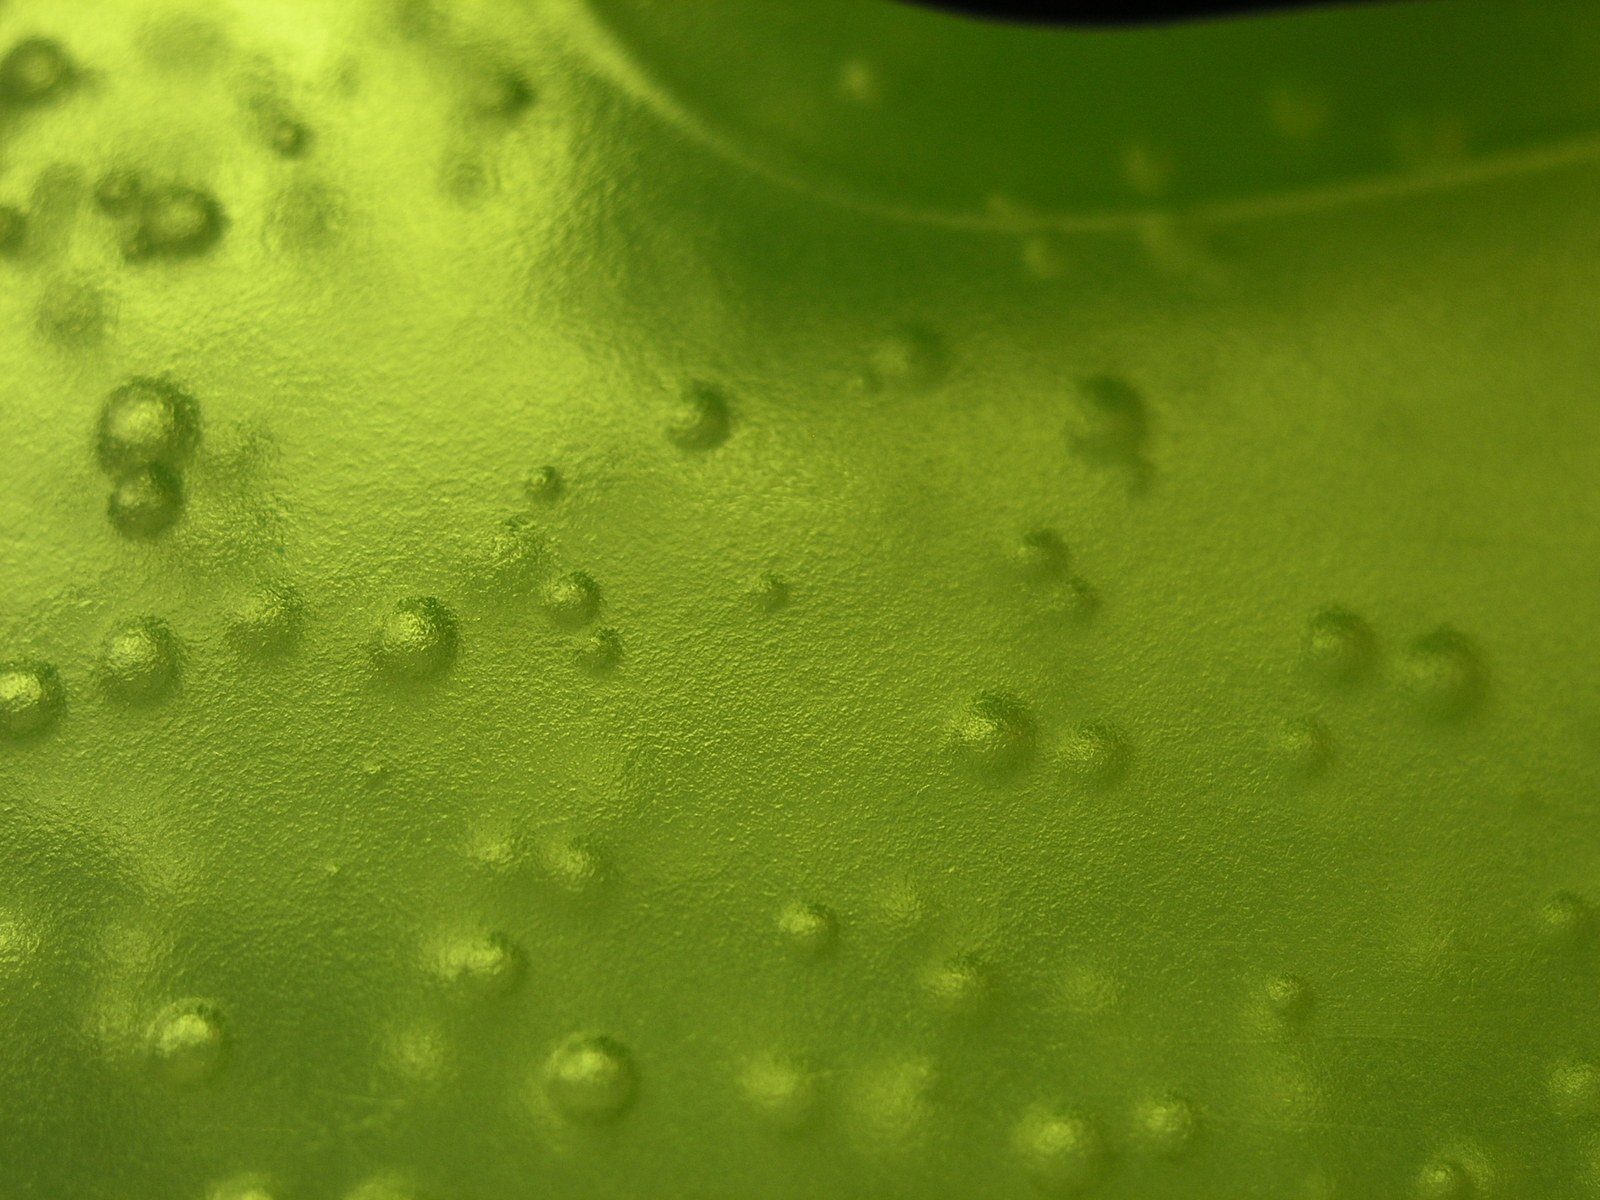 a green object with many tiny drops of water on it